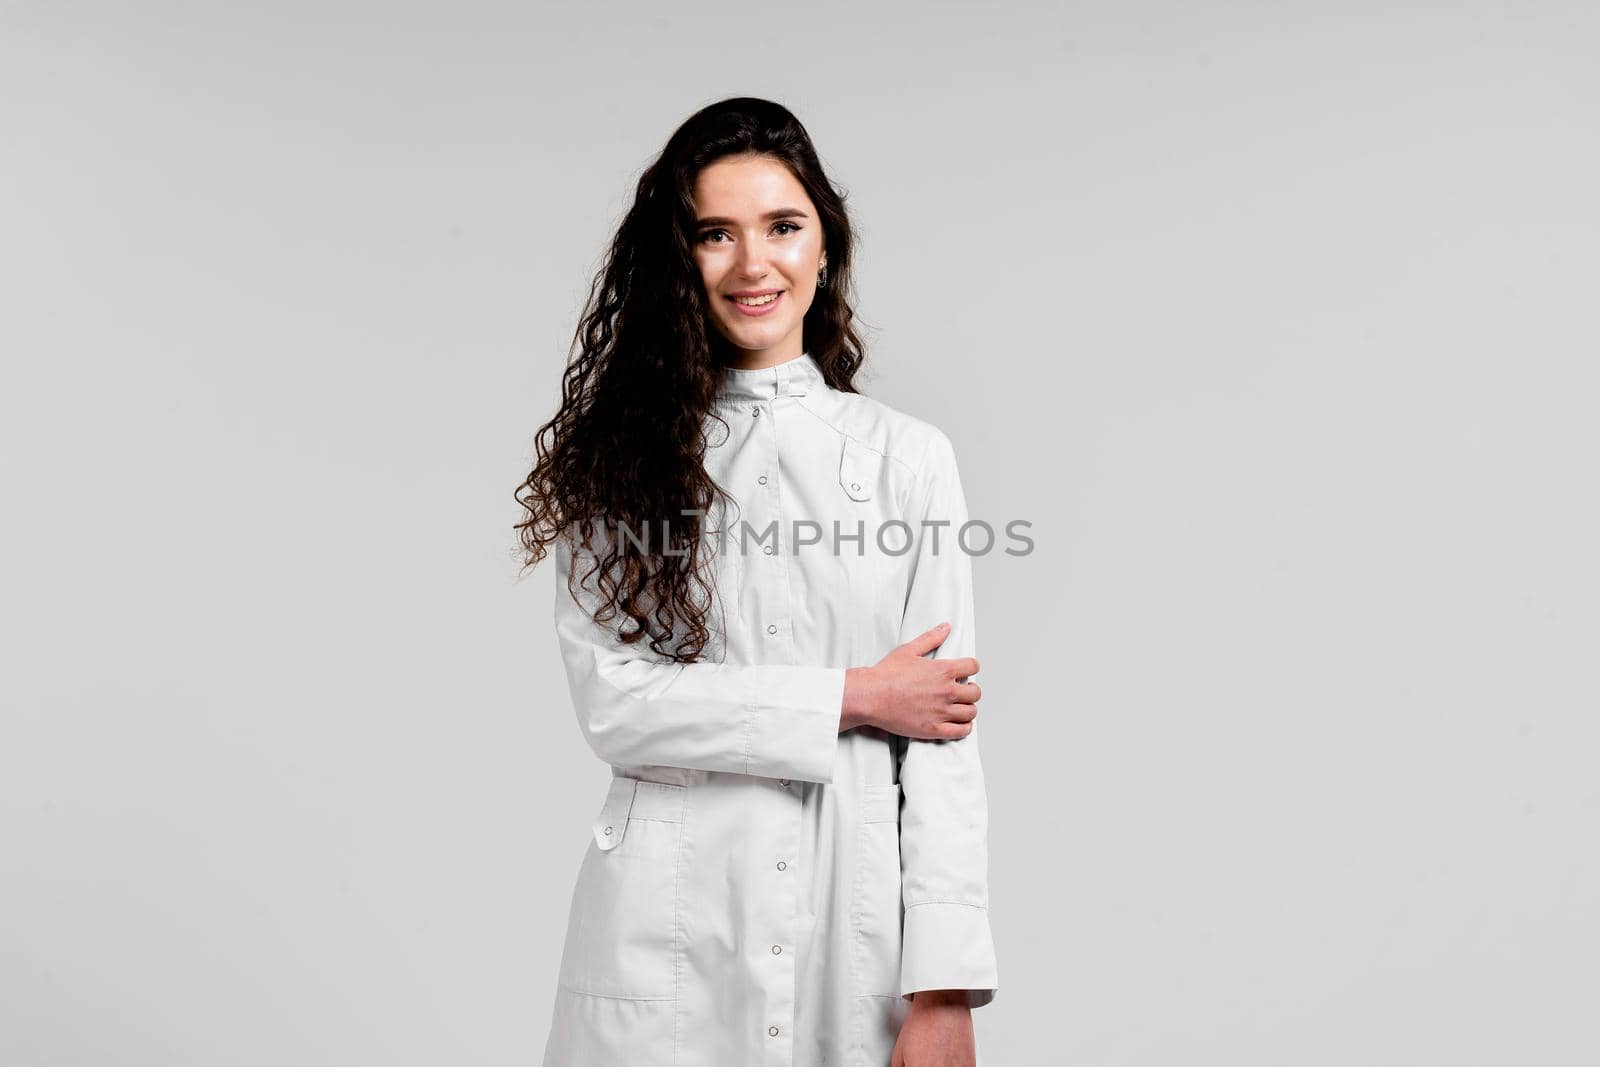 Girl surgeon in medical dress with curly hair on white background. 3rd wave of coronavirus covid-19 epidemy by Rabizo